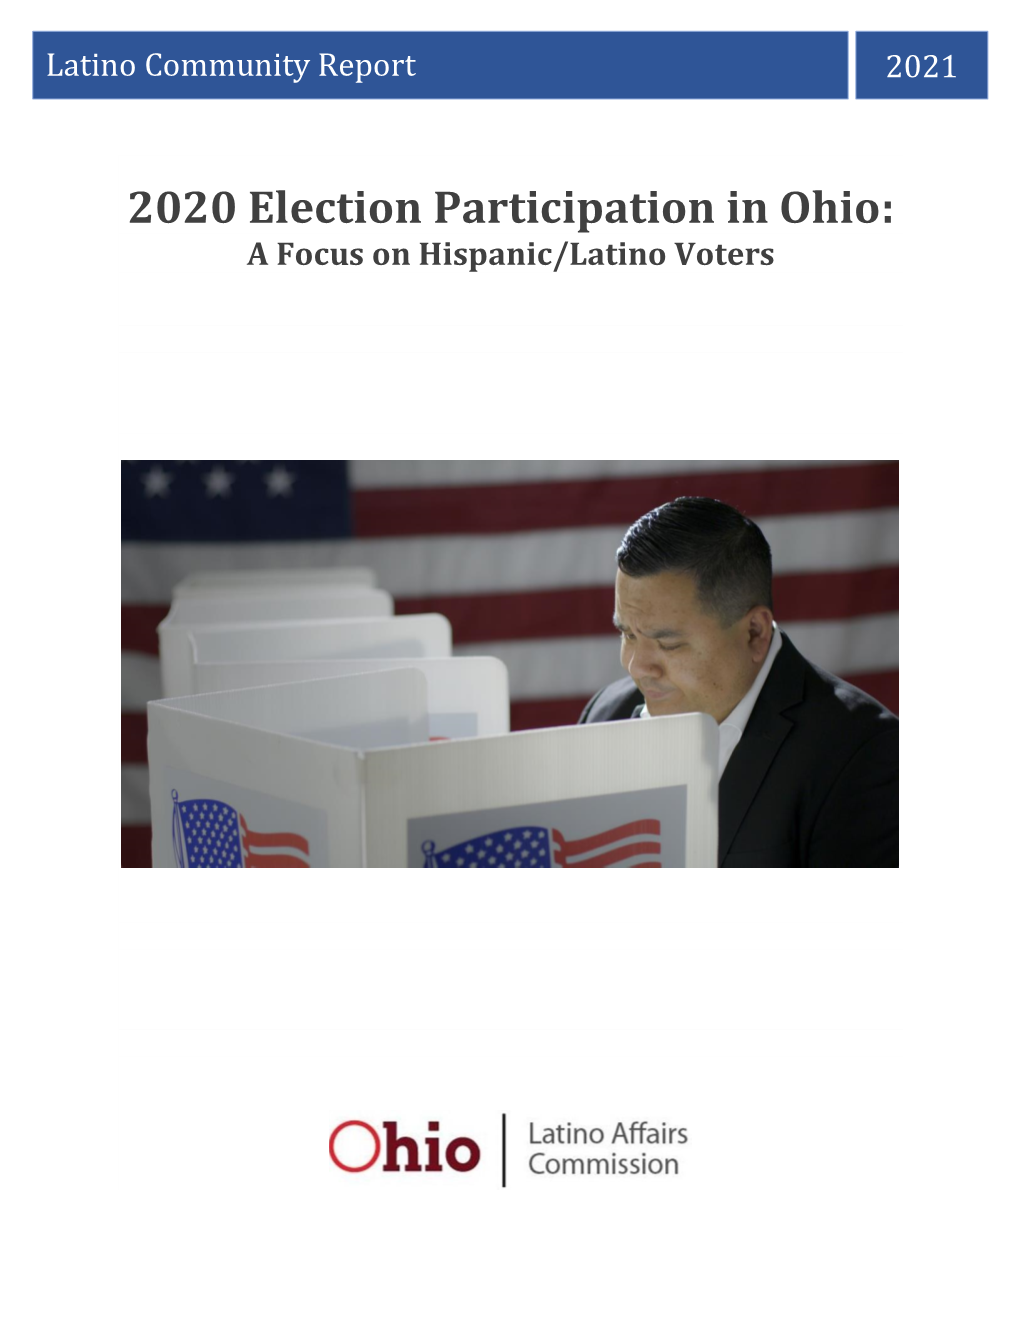 2020 Election Participation in Ohio: a Focus on Hispanic/Latino Voters